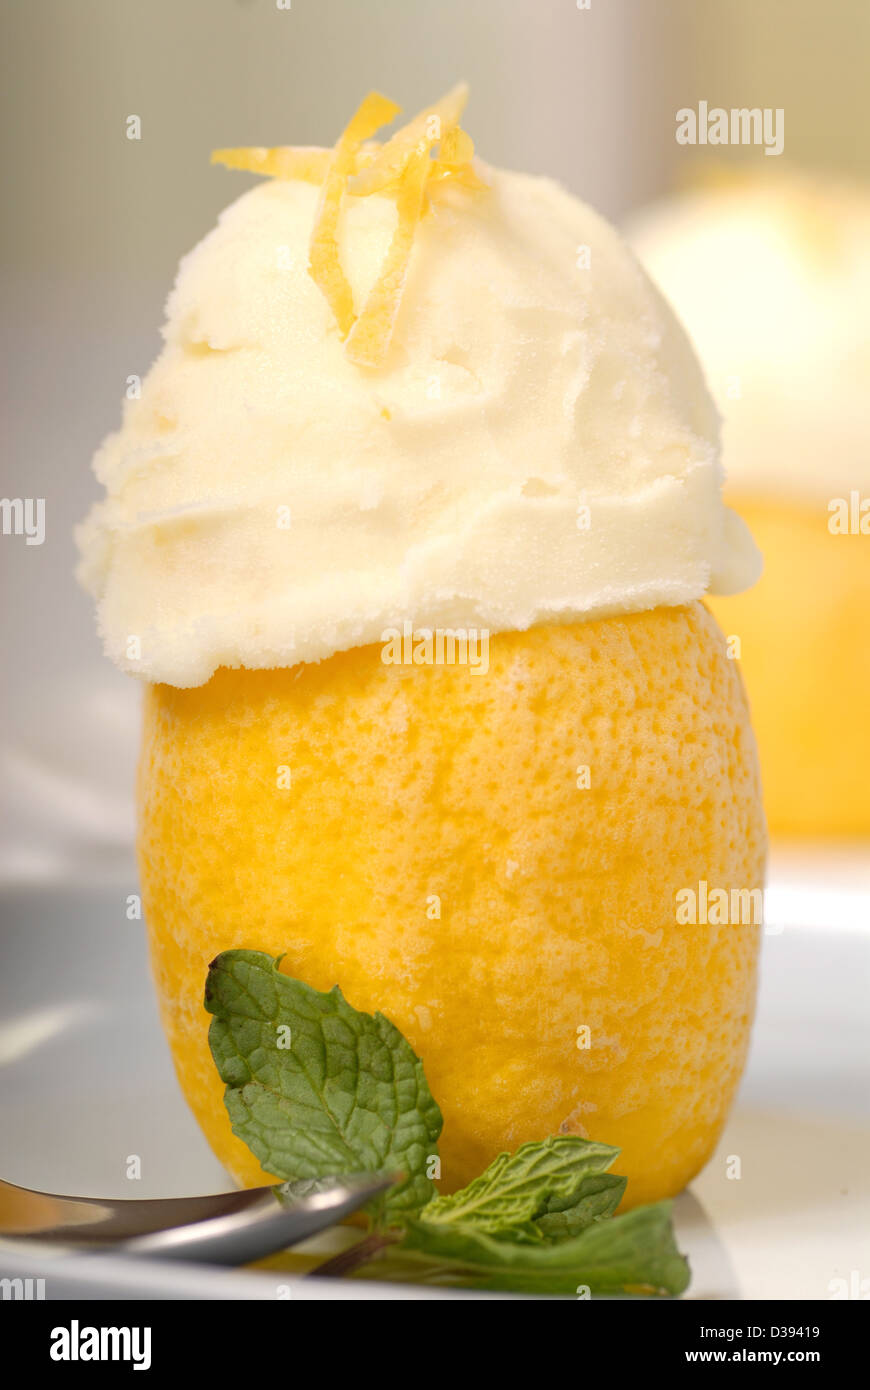 Two Lemon sorbets in a frozen lemon shell with mint and a shallow depth of field Stock Photo